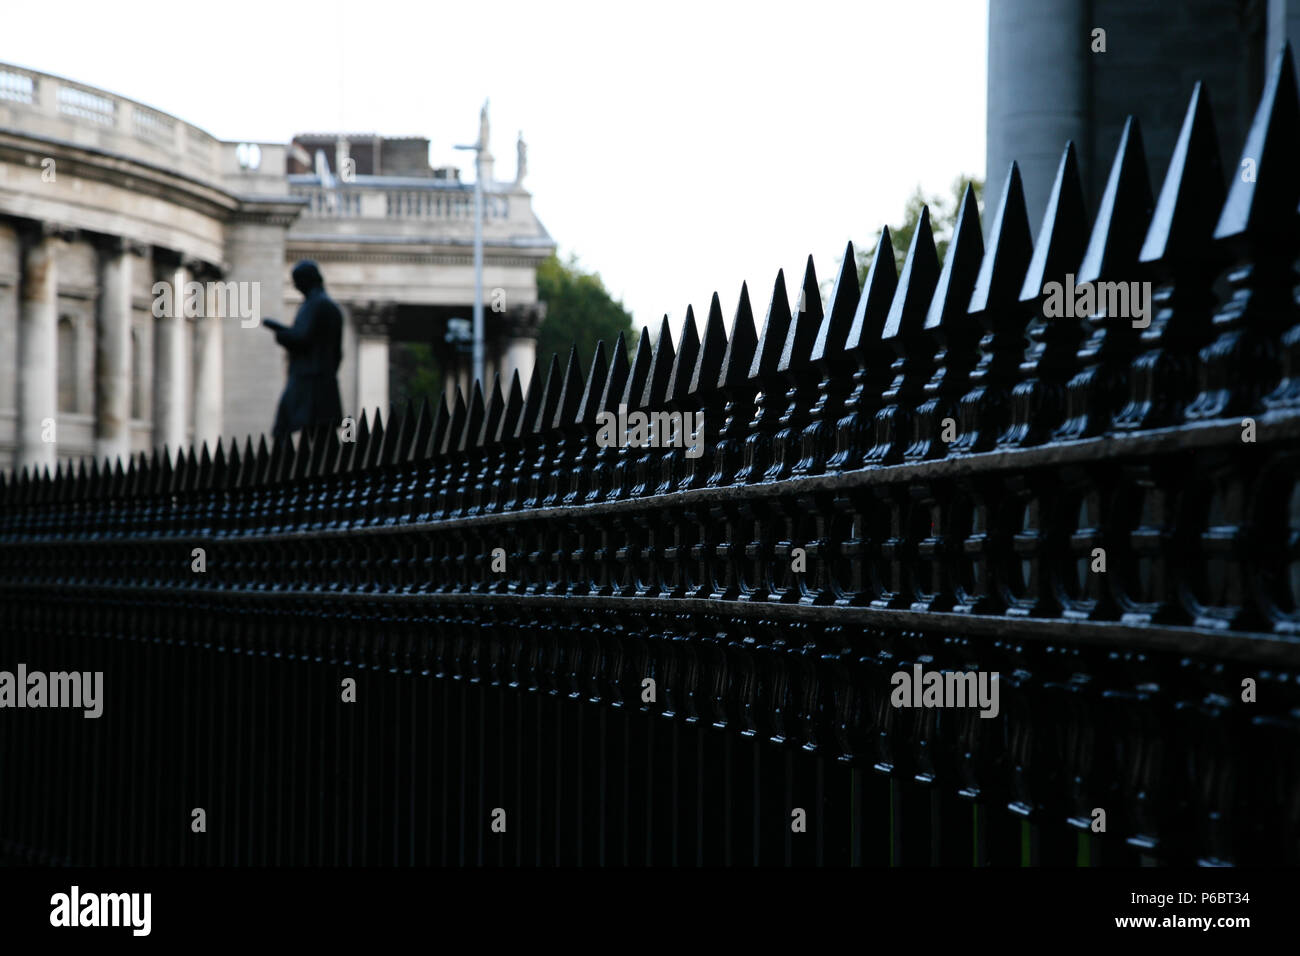 Black painted steel railing leading the eye towards an old city building with statue in the gardens, Dublin, Ireland. Stock Photo